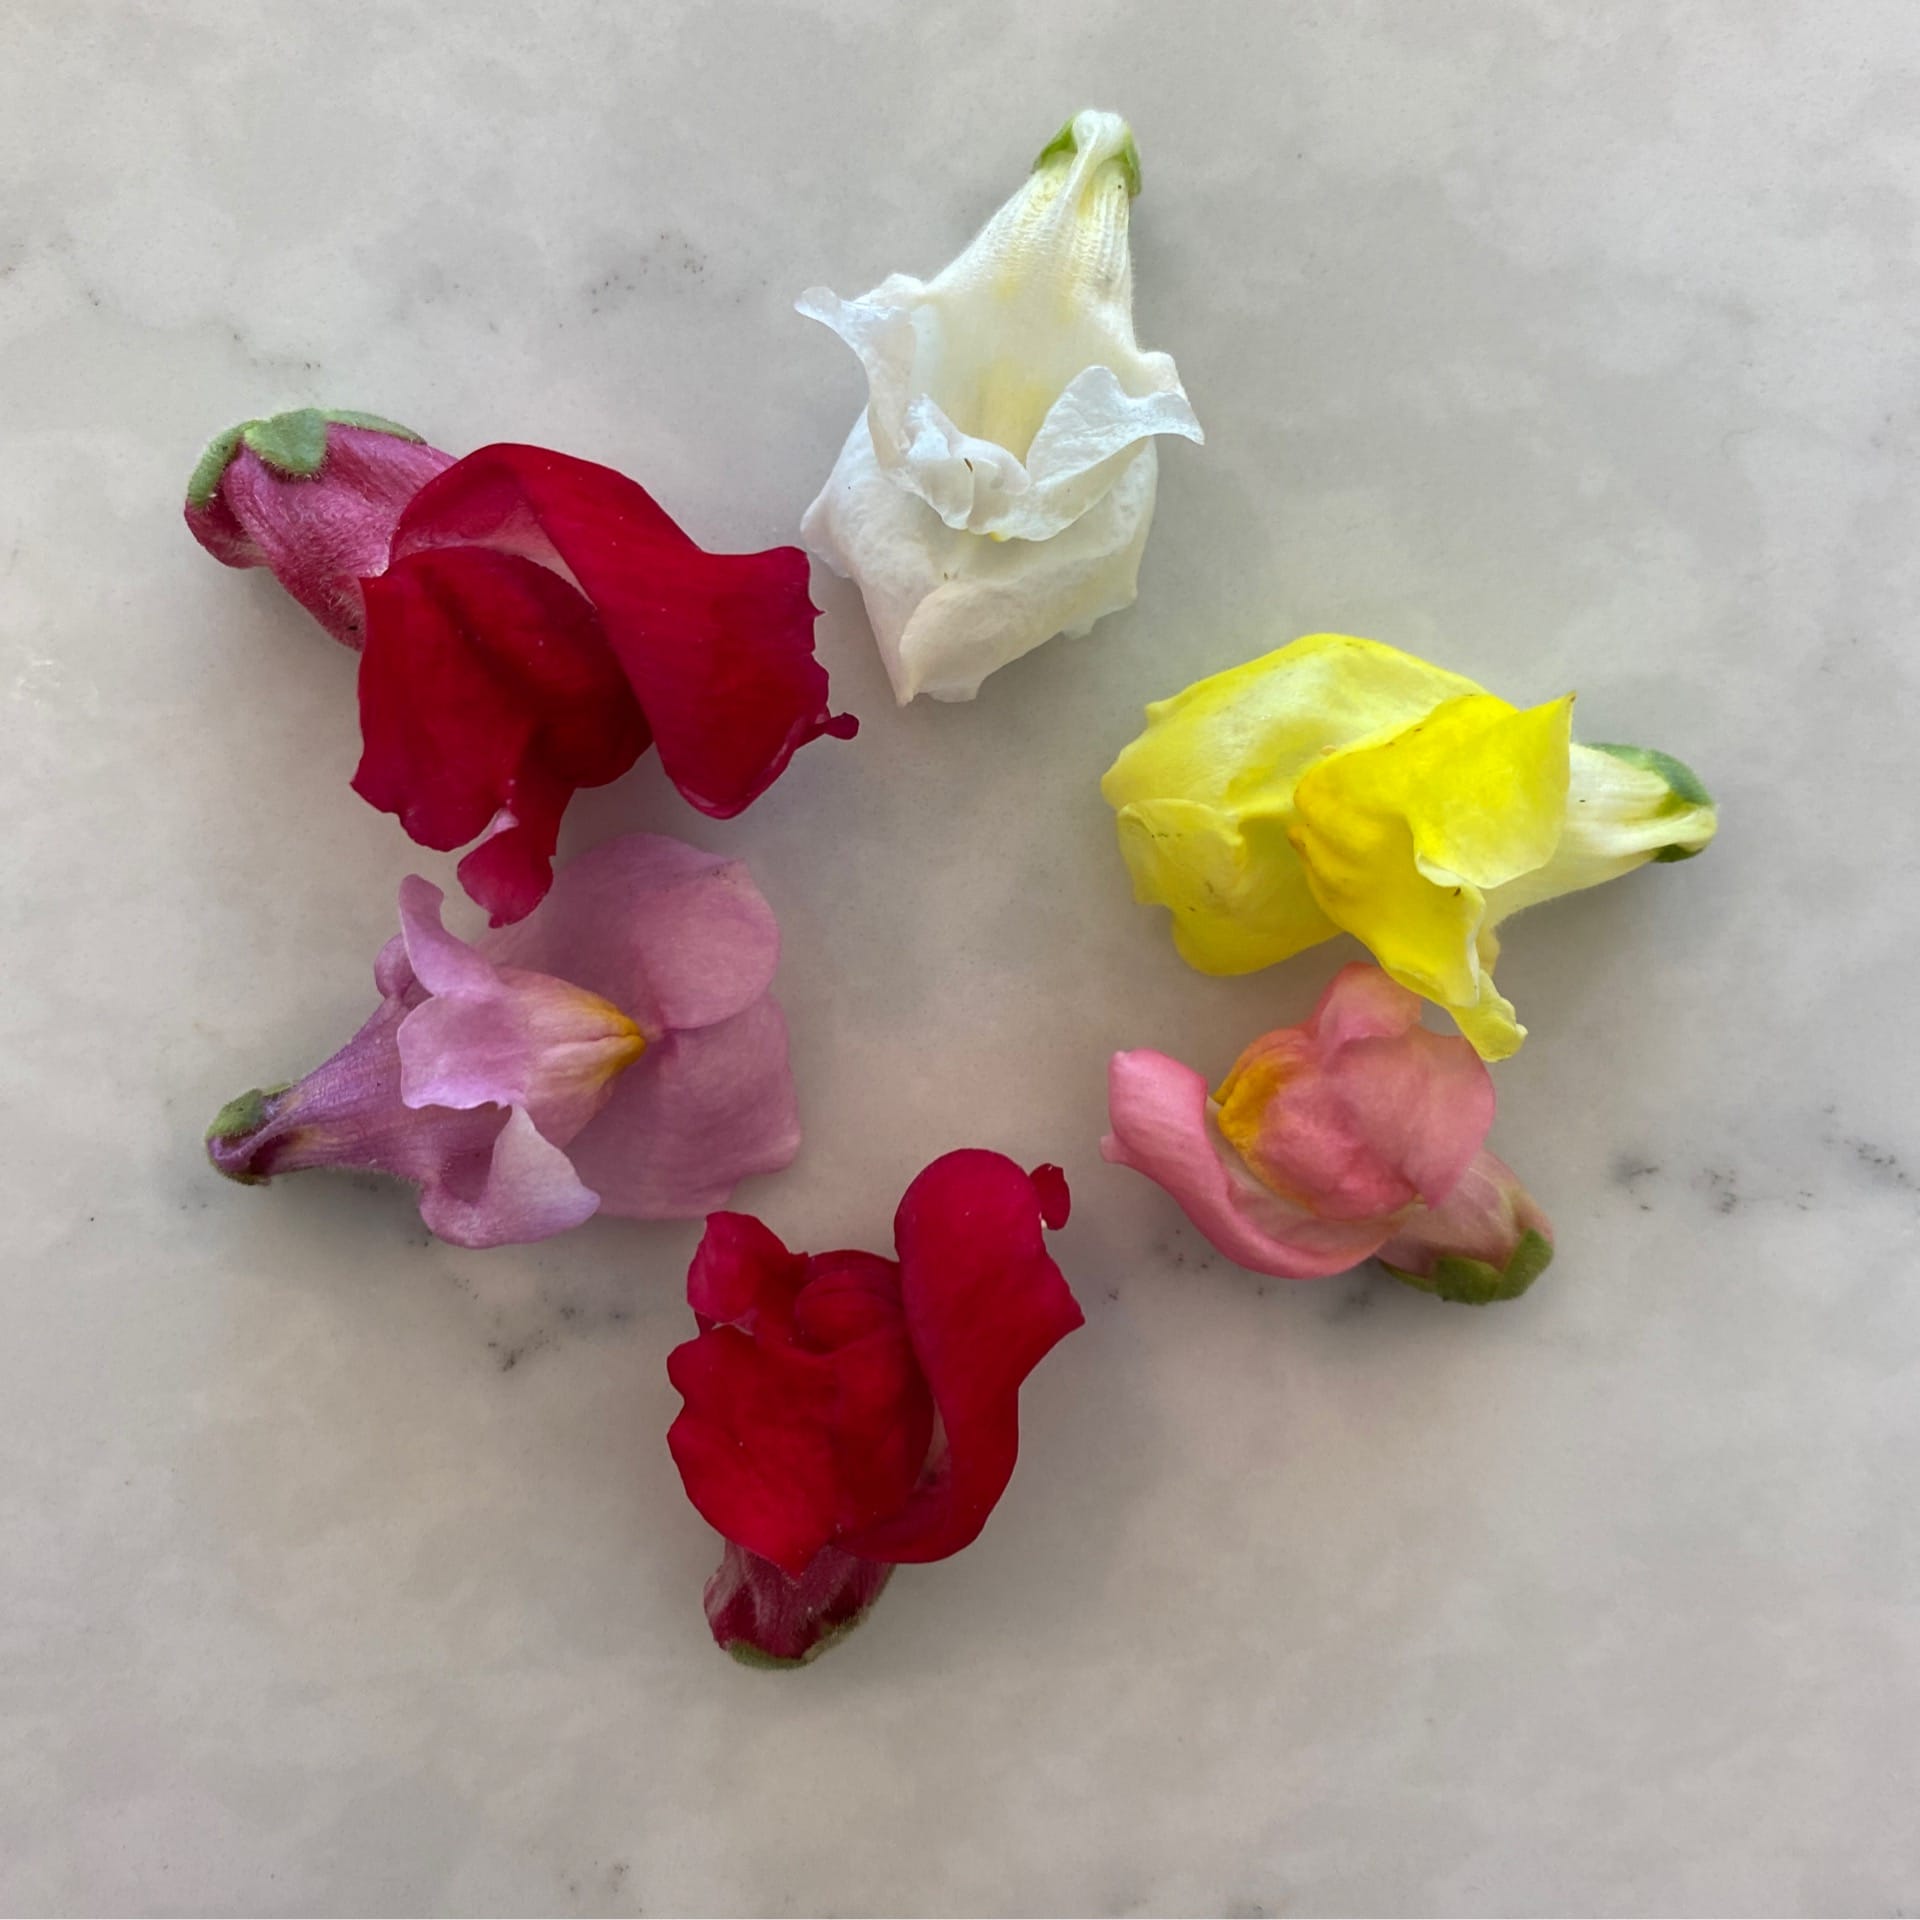 sold out edible snapdragon flowers case of 12 sale